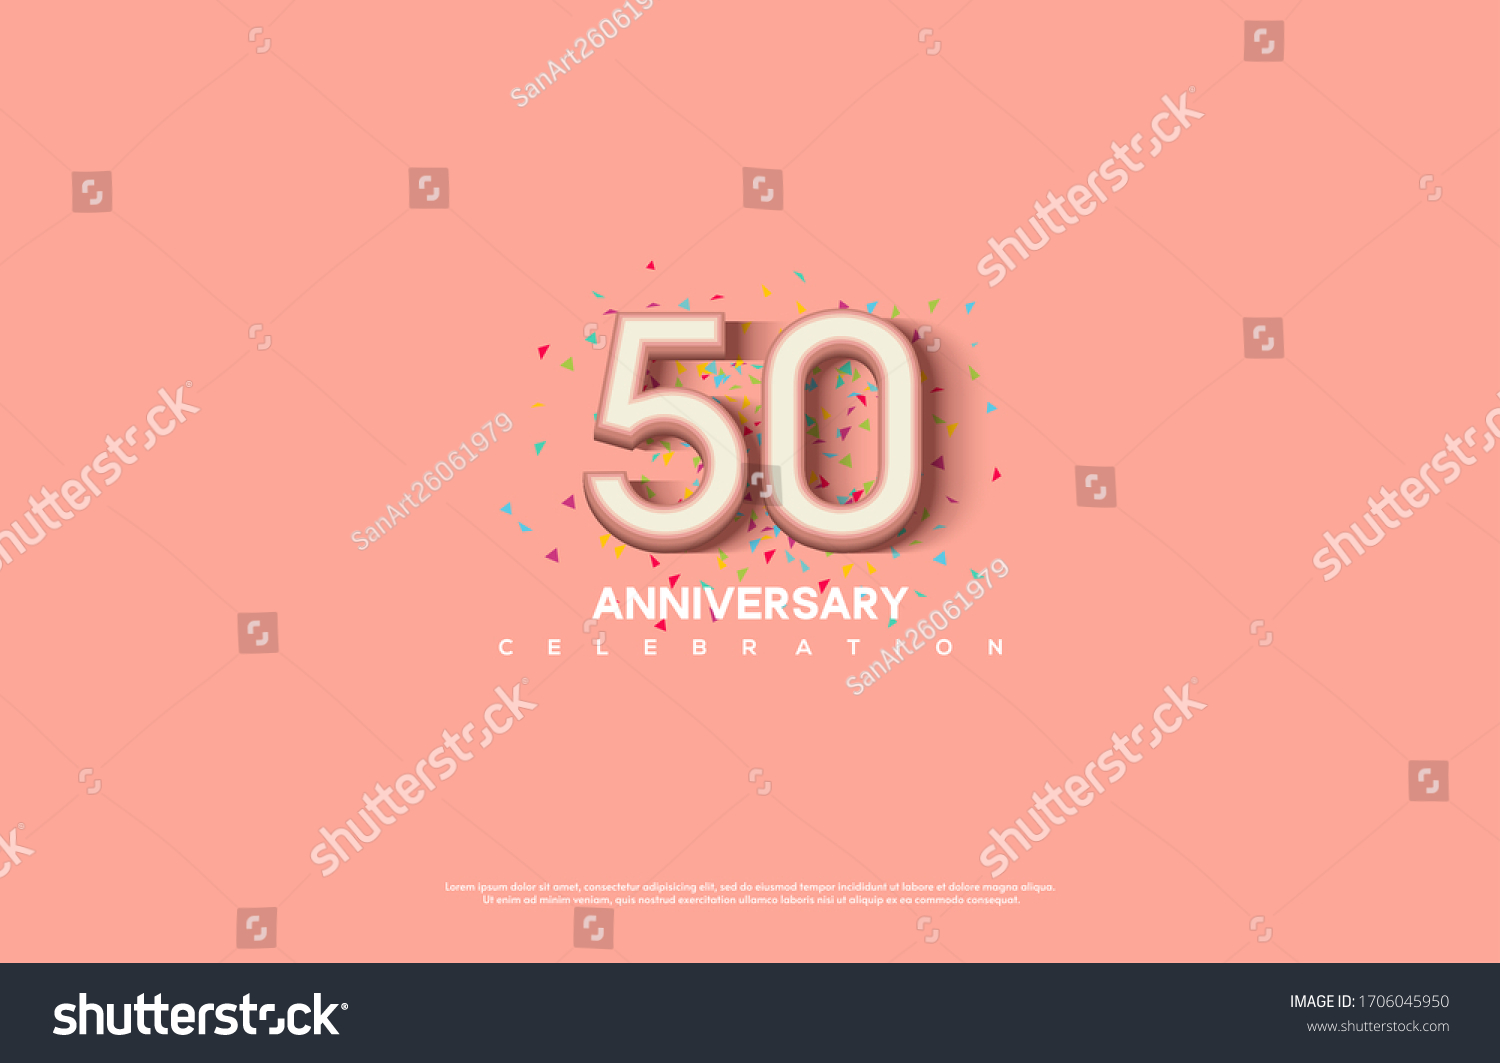 SVG of 50th anniversary background with illustrations of white numbers and pink color on the edges of numbers. svg